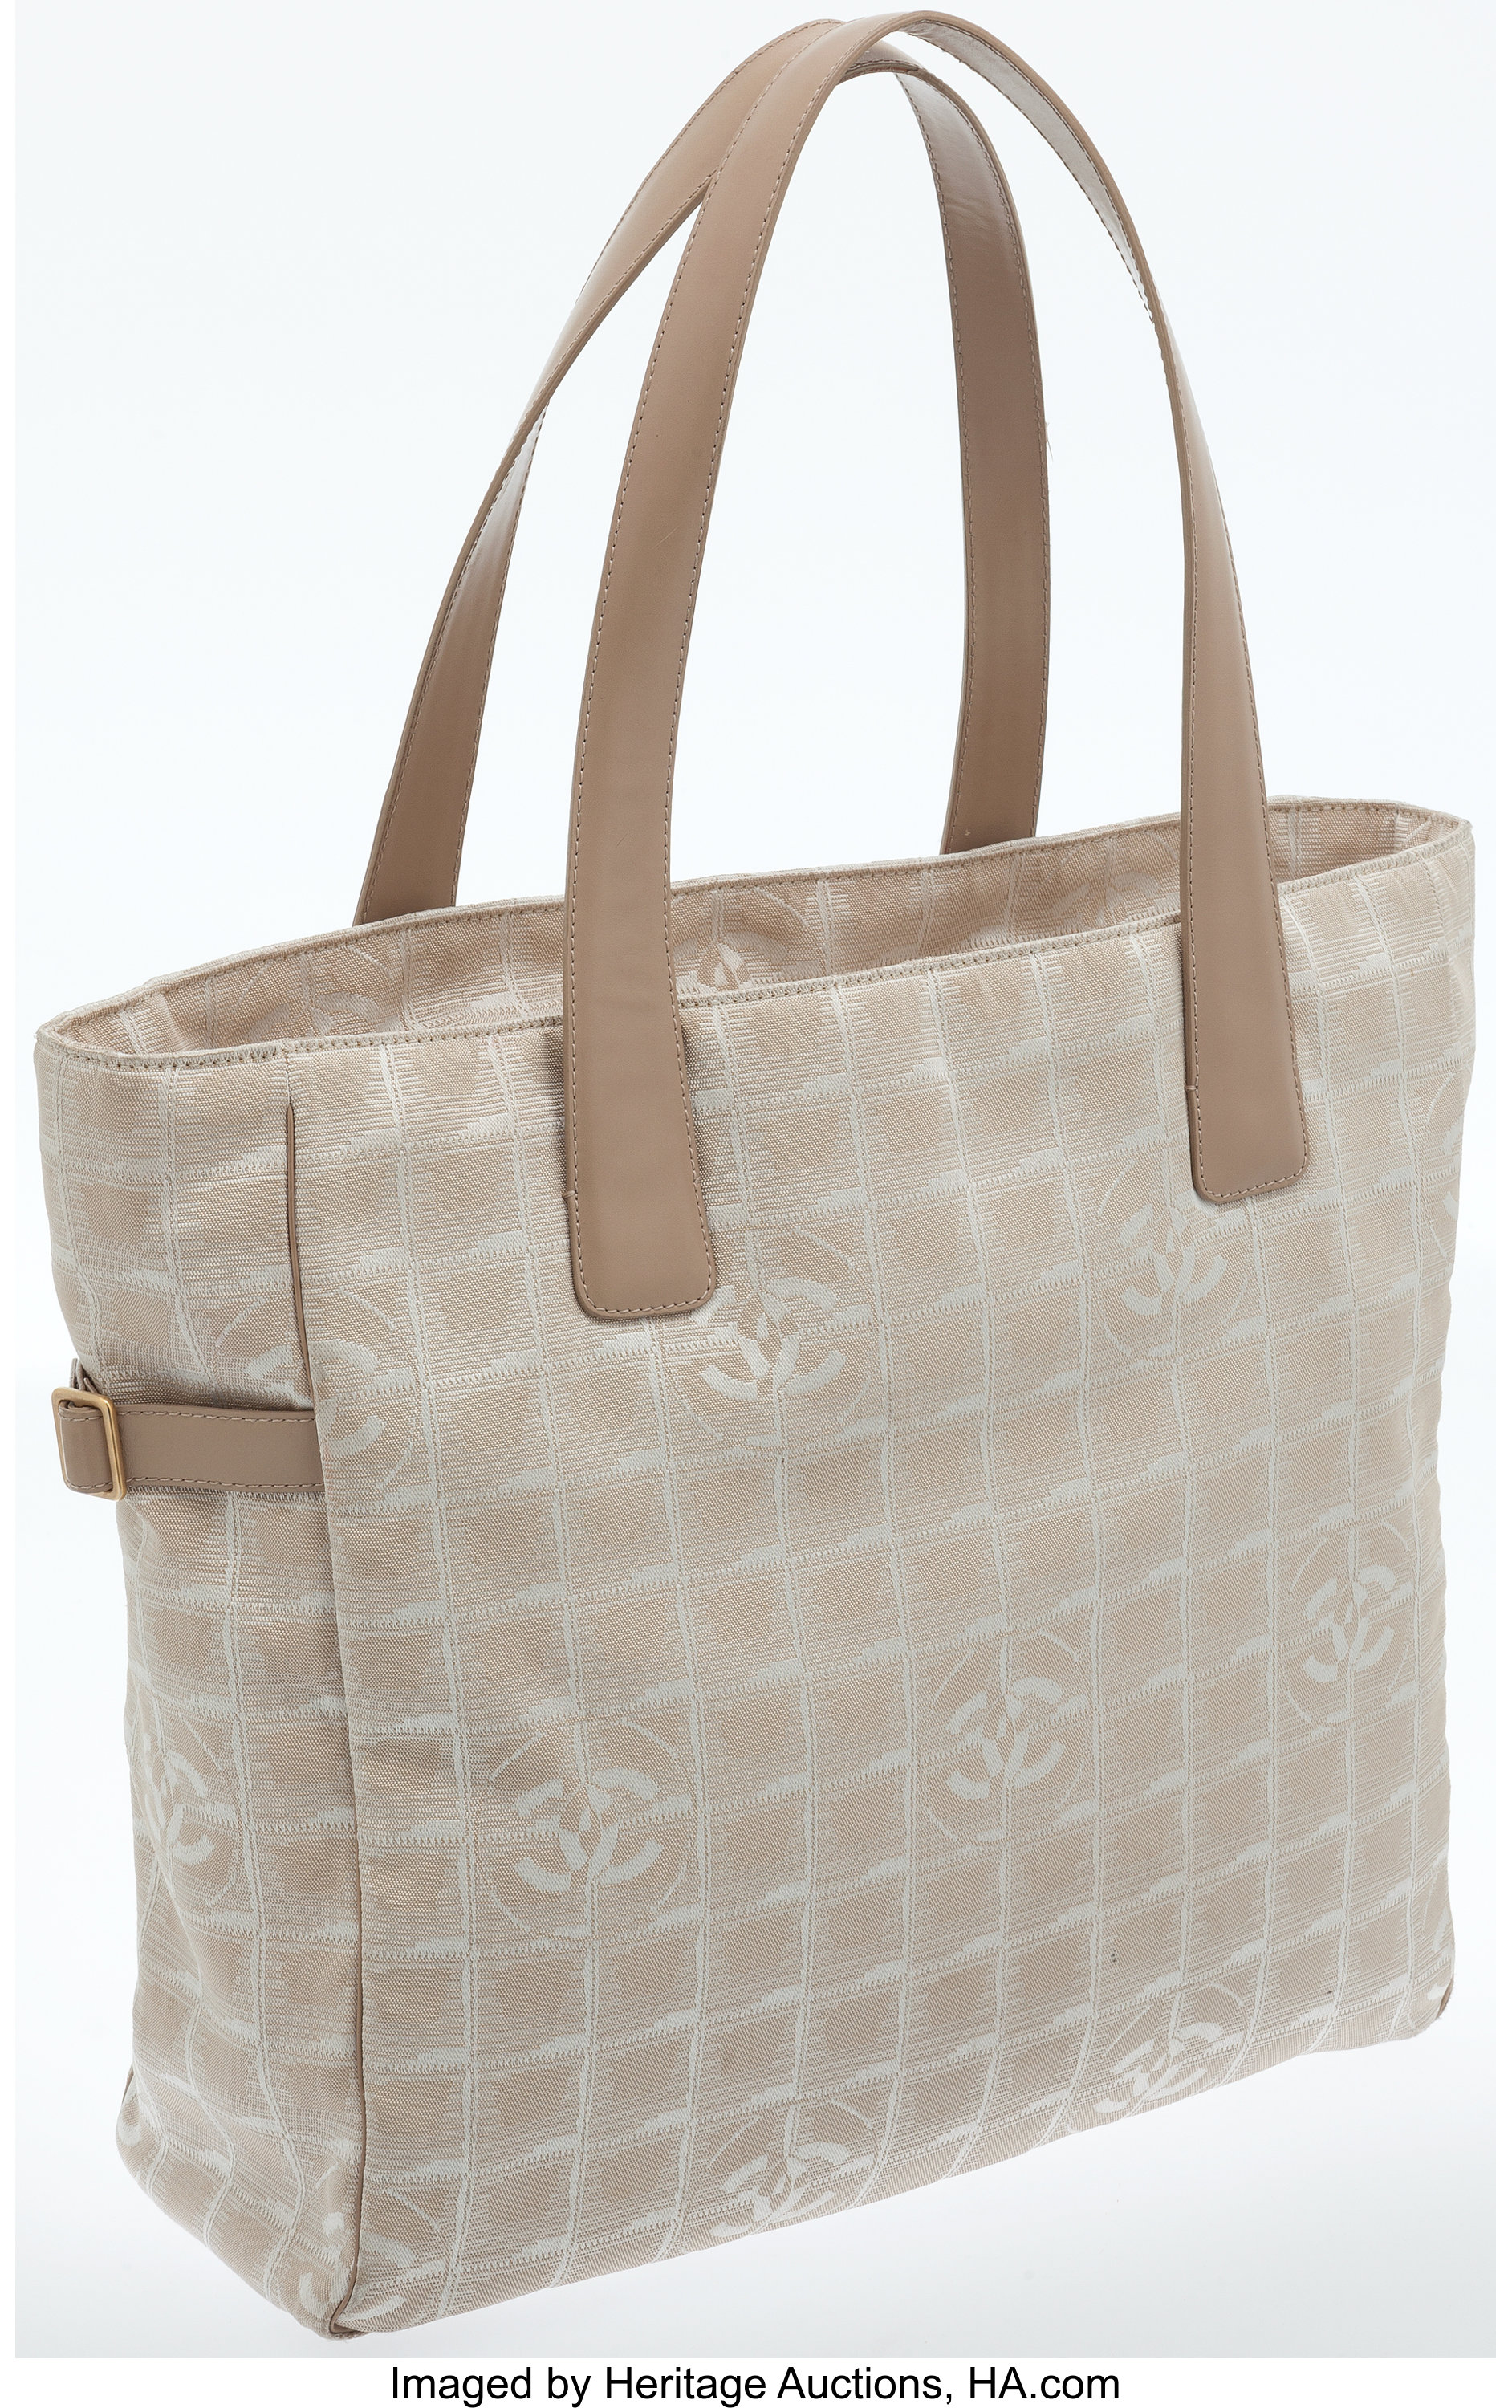 Chanel Beige Monogram Fabric and Leather Tote Bag.  Luxury